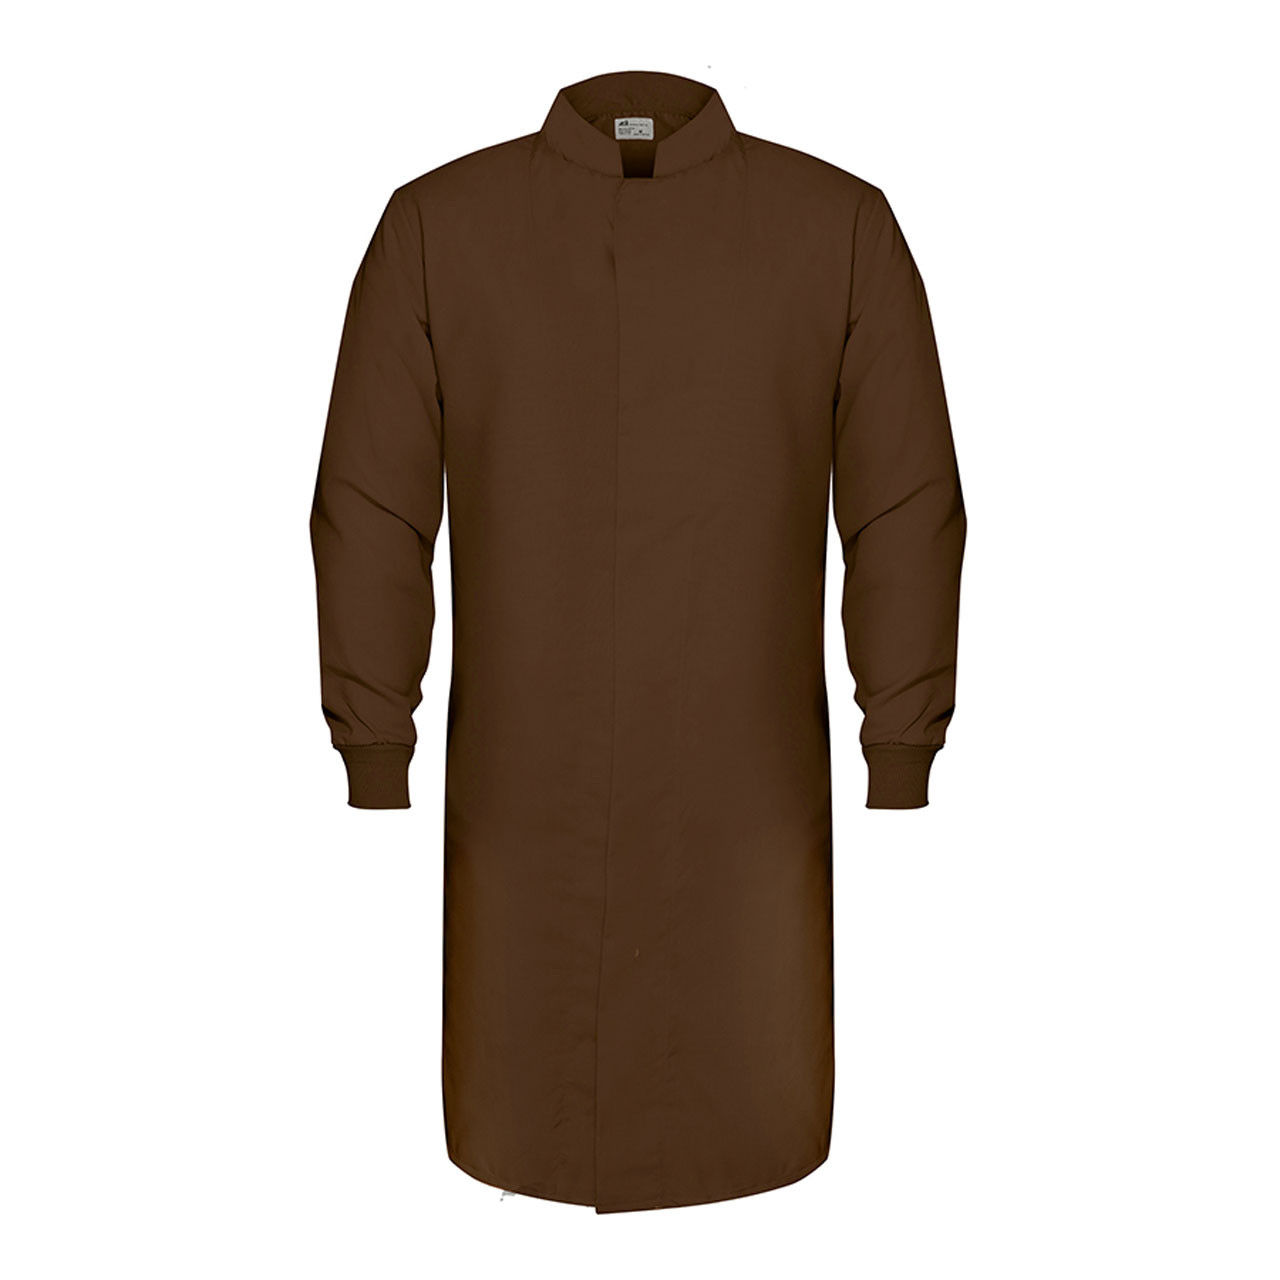 Is the brown lab coat made from HACCP Knit Cuff material?